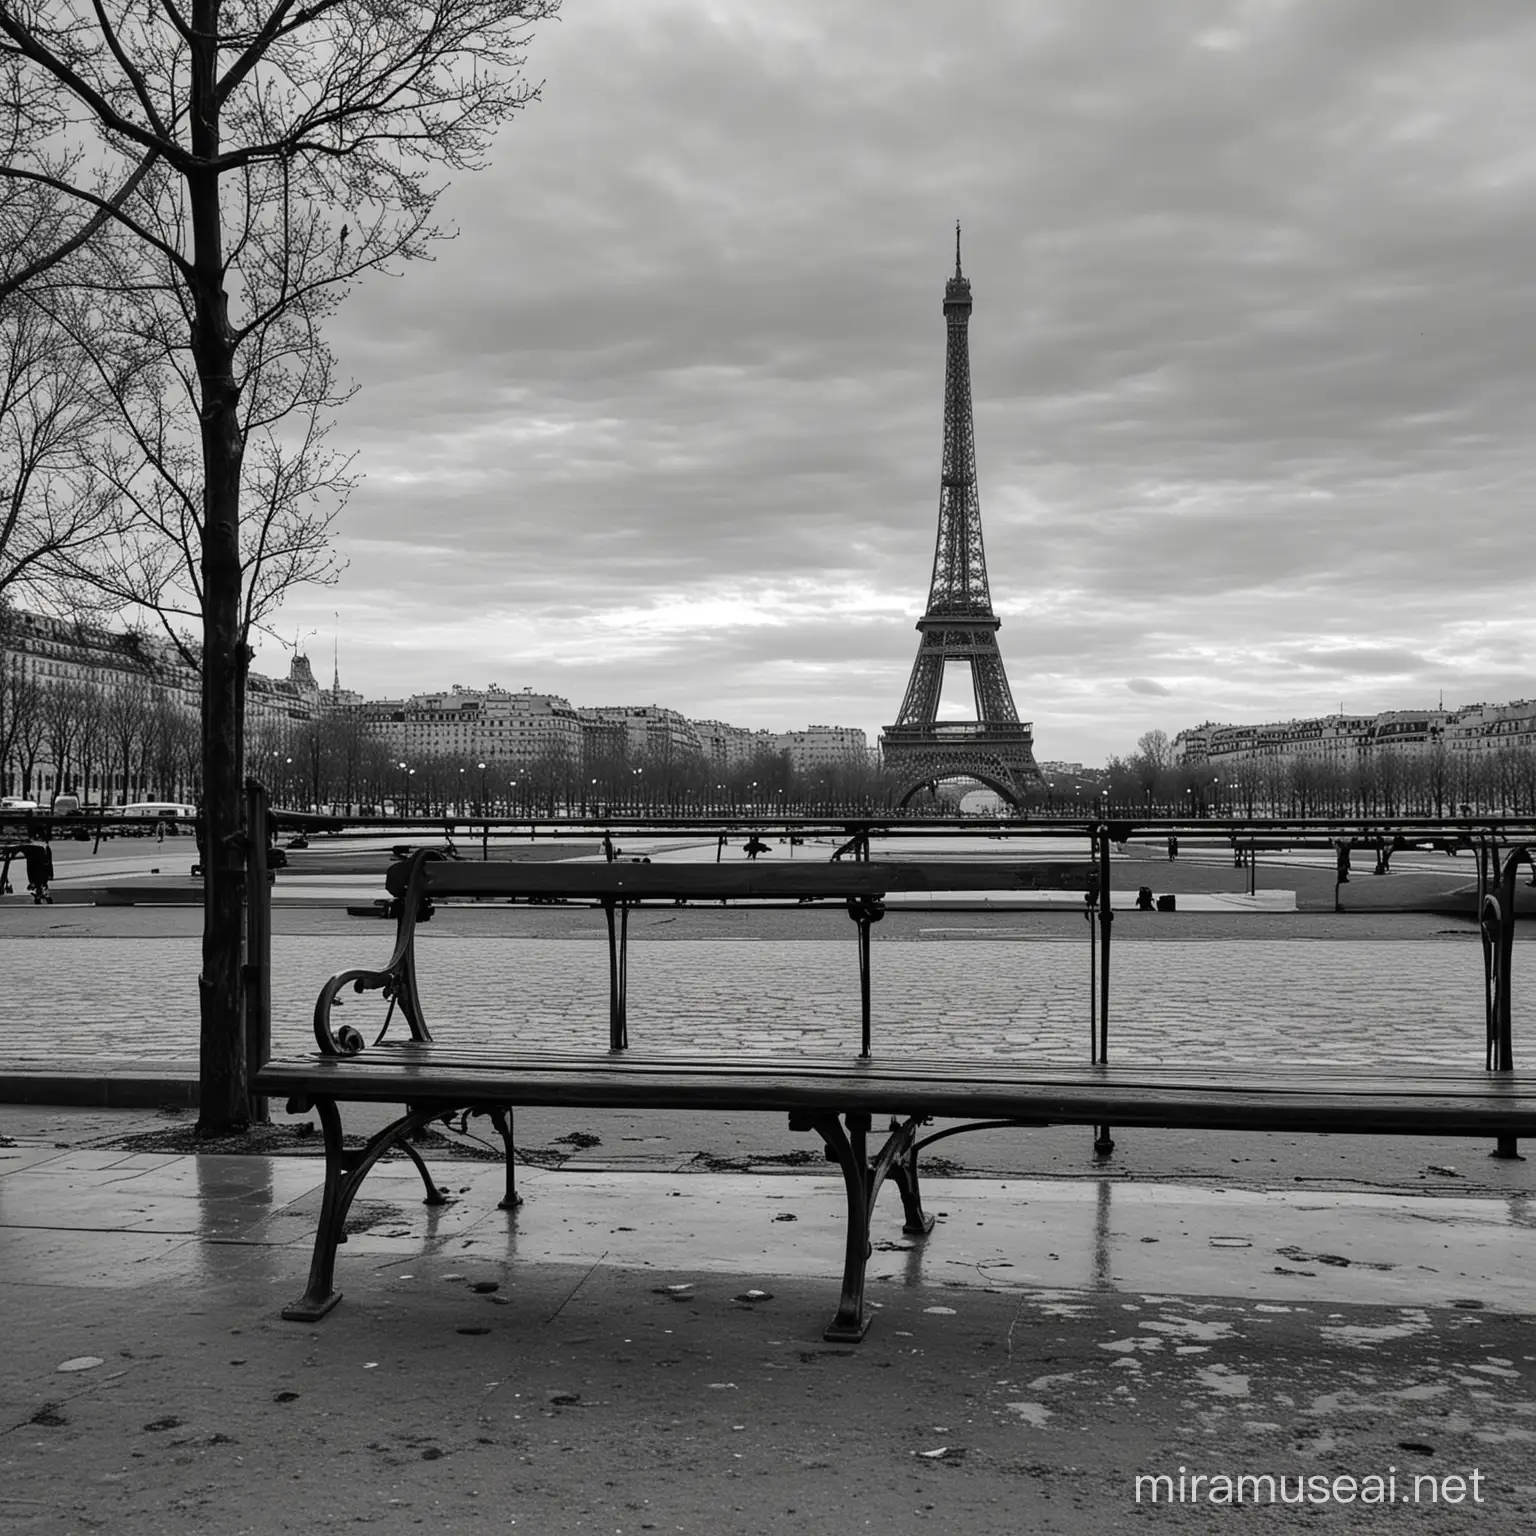 Solitary Bench Beneath the Iconic Eiffel Tower in Paris